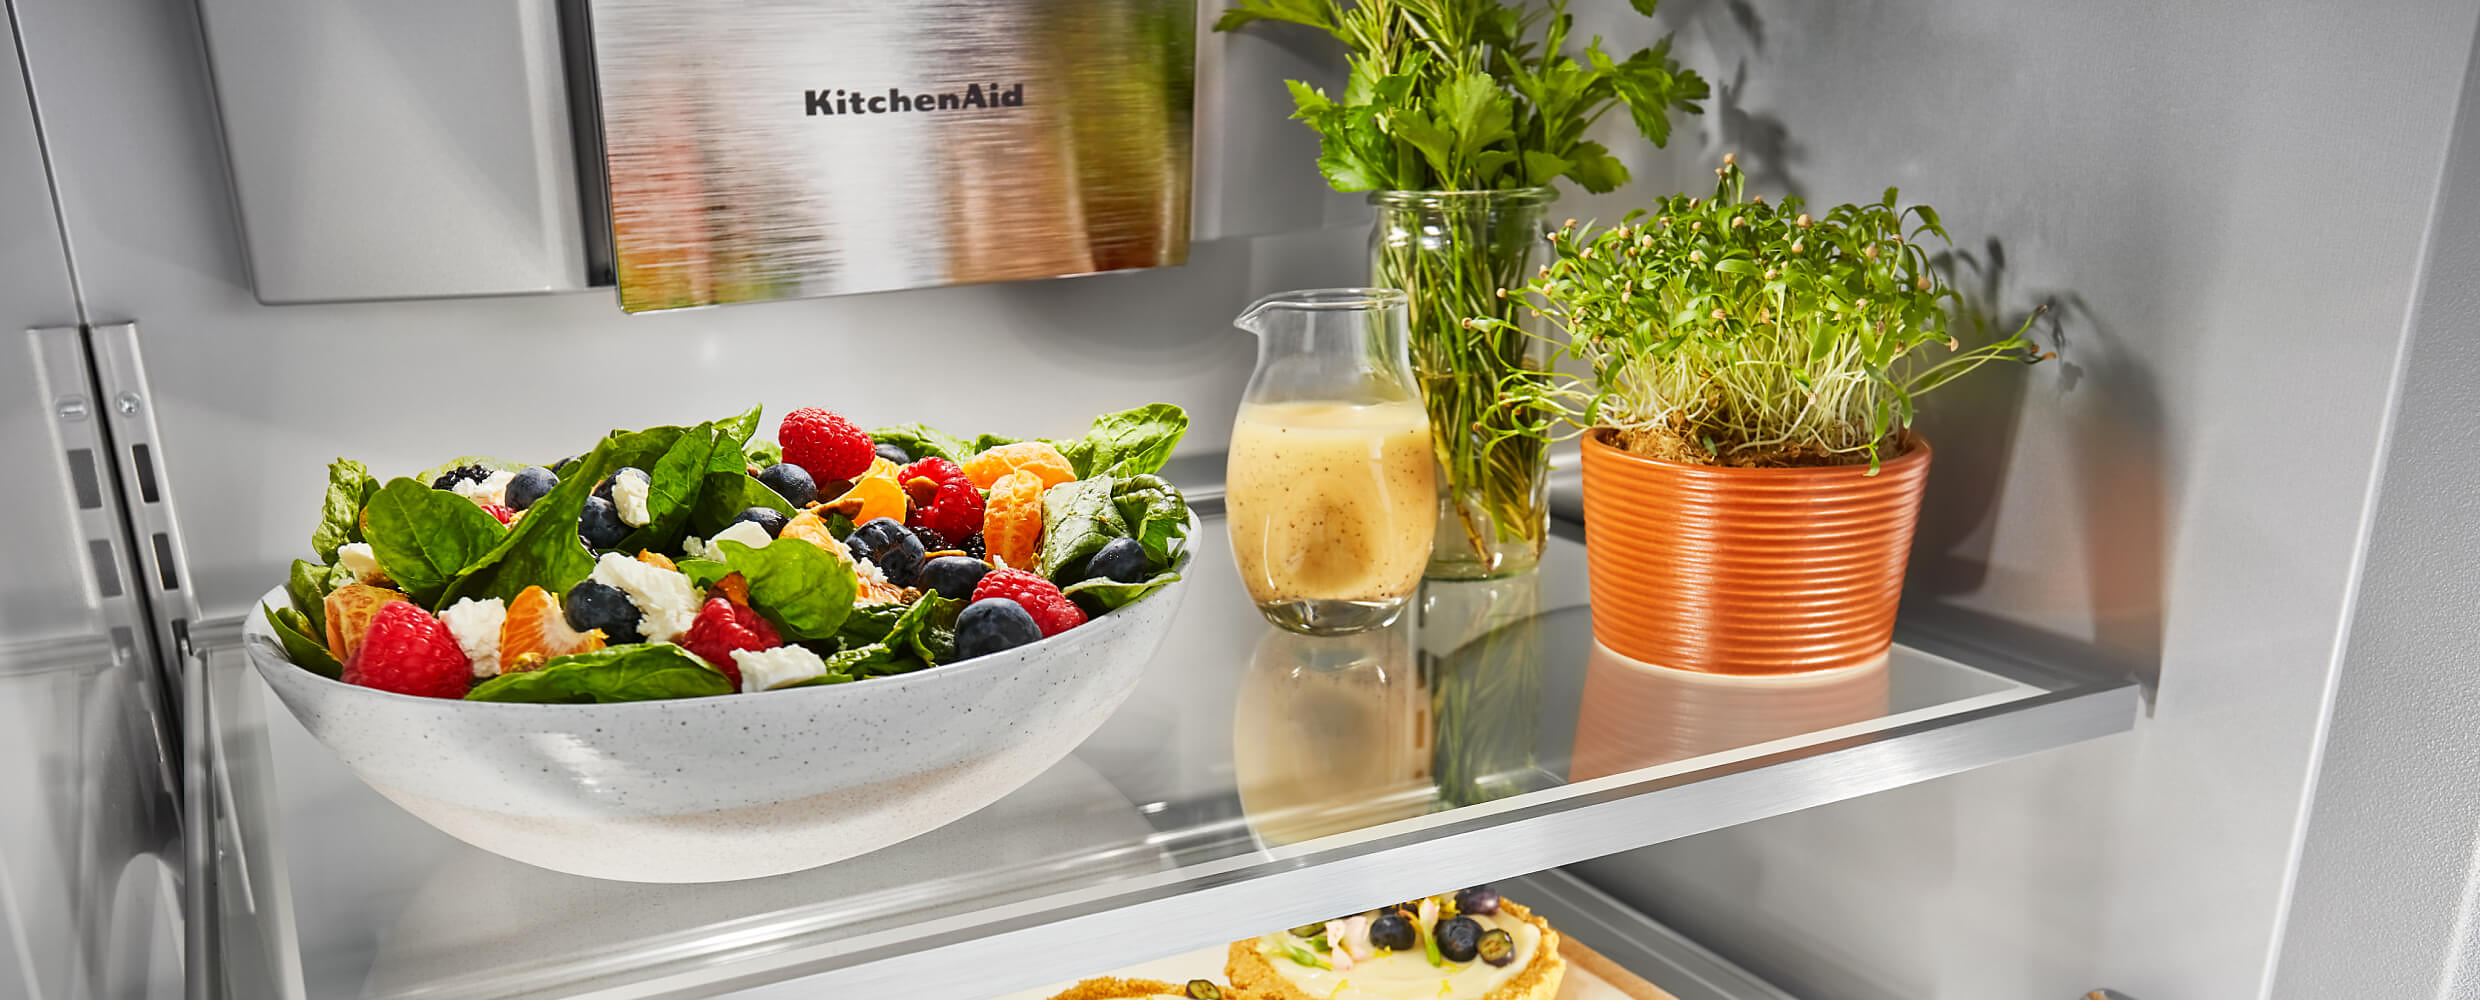 Interior of a 36" KitchenAid® Built-In Side-by-Side Refrigerator filled with a large fresh salad, beverages and herbs